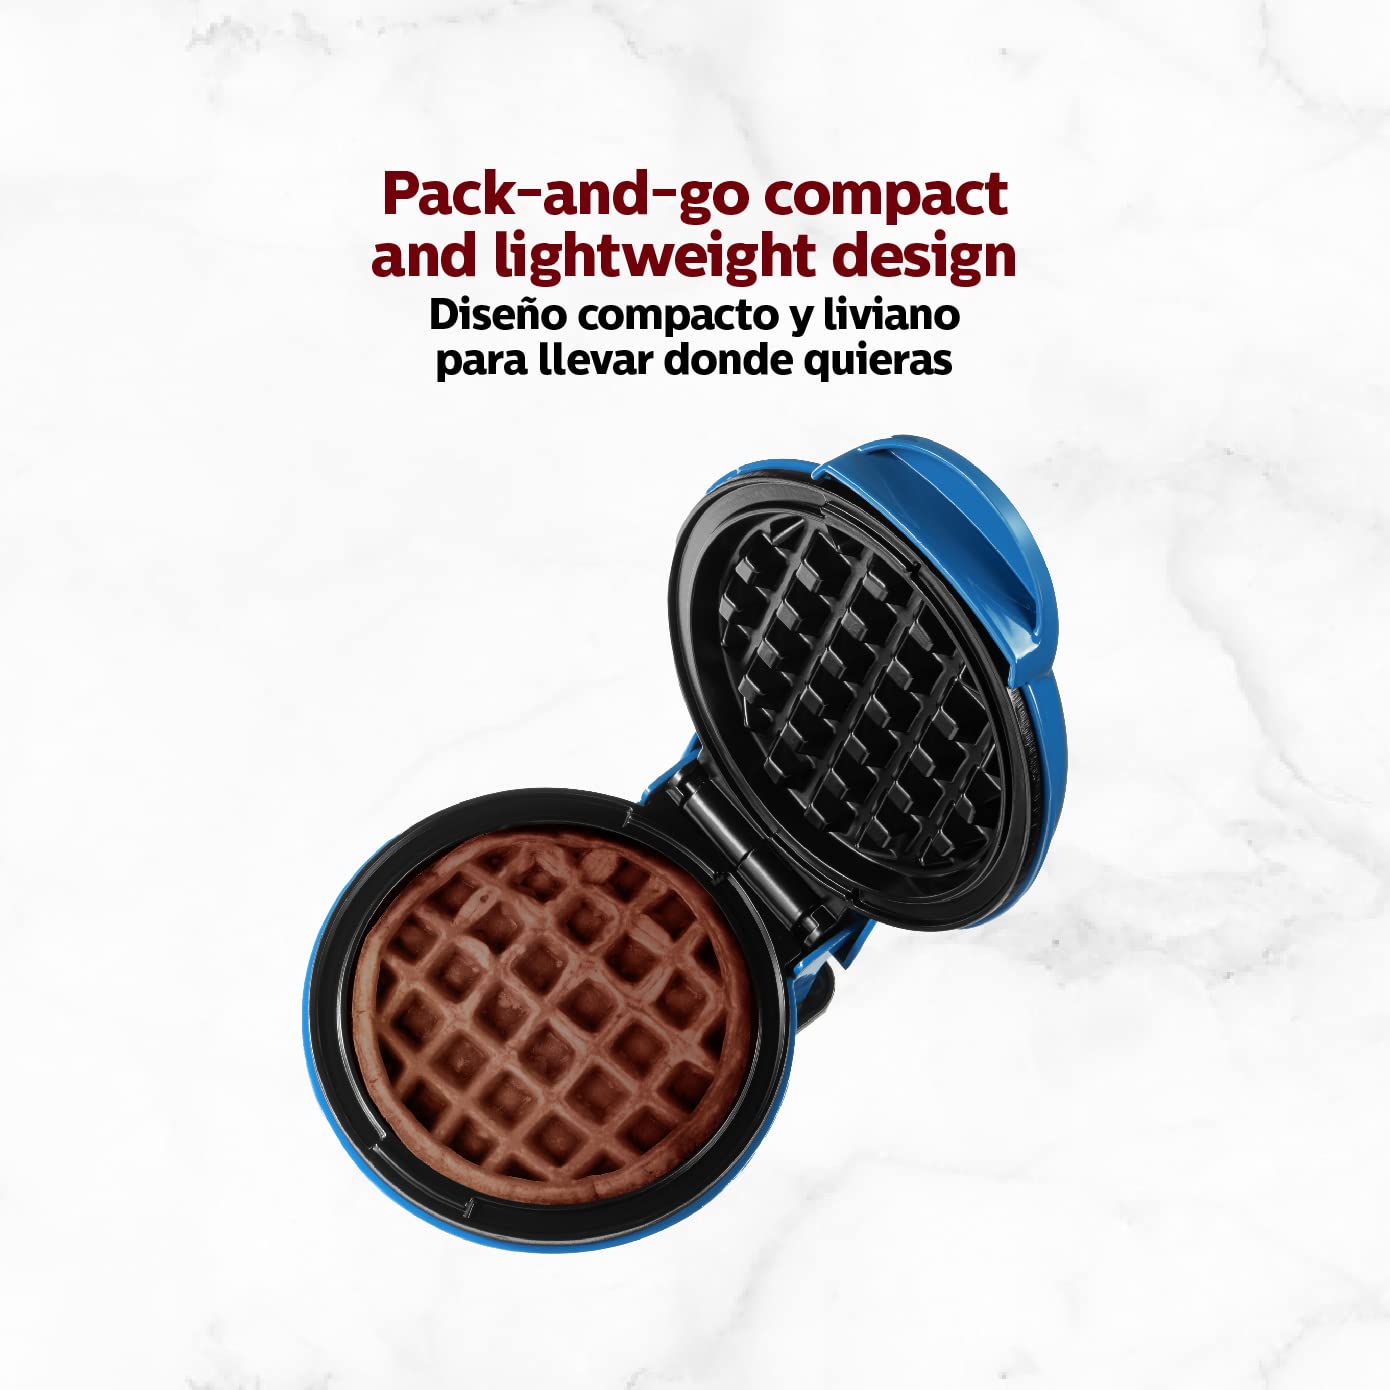 Holstein Housewares Personal Non-Stick Waffle Maker, Blue - 4-inch Waffles in Minutes